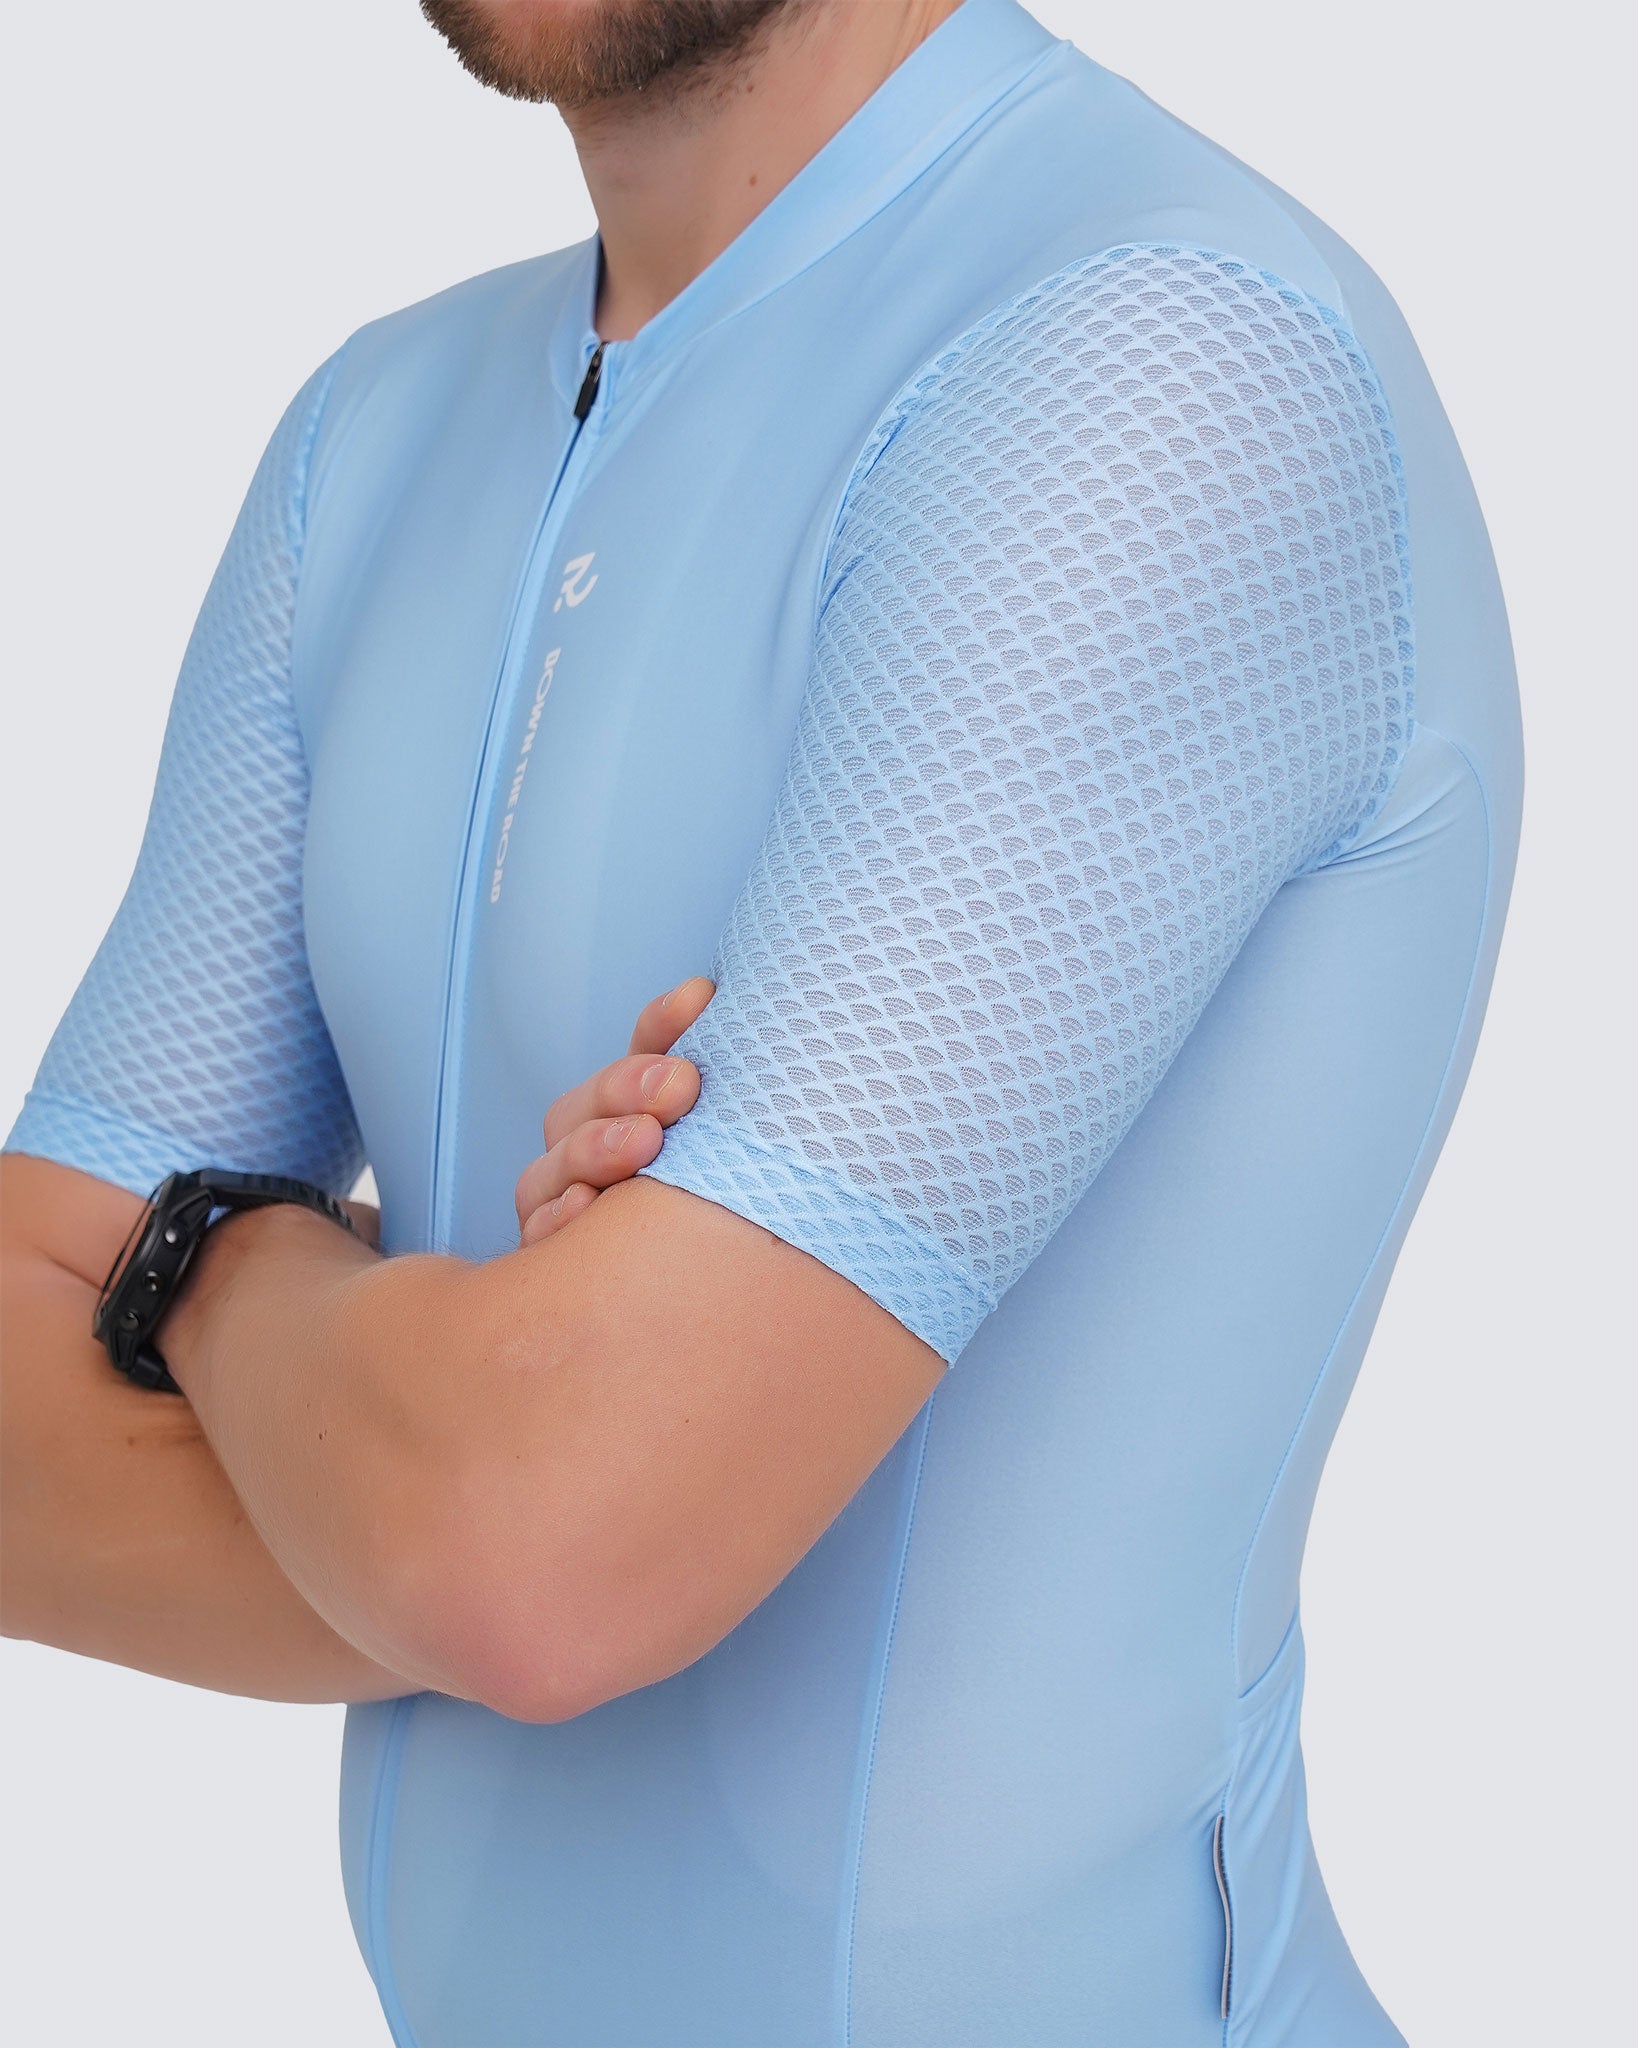 nature blue cycling jersey mesh sleeve close up